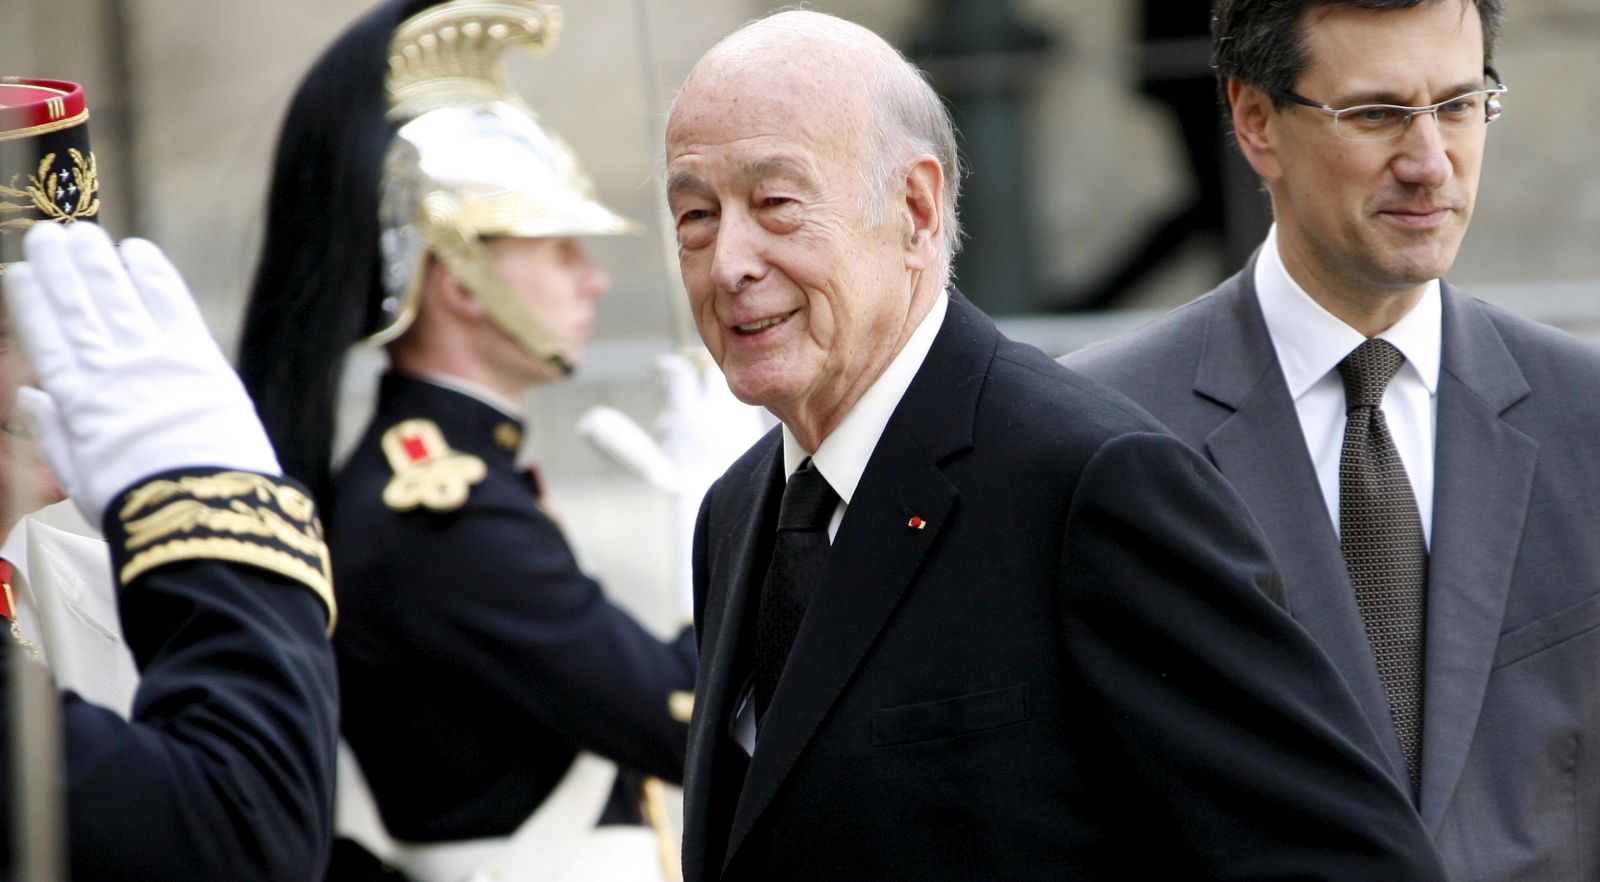 epa08858234 (FILE) Former French President Valery Giscard d'Estaing arrives at the official funeral ceremony of former French Minister Yvon Bourges at the Invalides in Paris, France, 23 April 2009  (reissued 02 December 2020). According to reports on 02 December 2020, Former French president Valery Giscard d'Estaing has died at the age of 94.  EPA/LUCAS DOLEGA